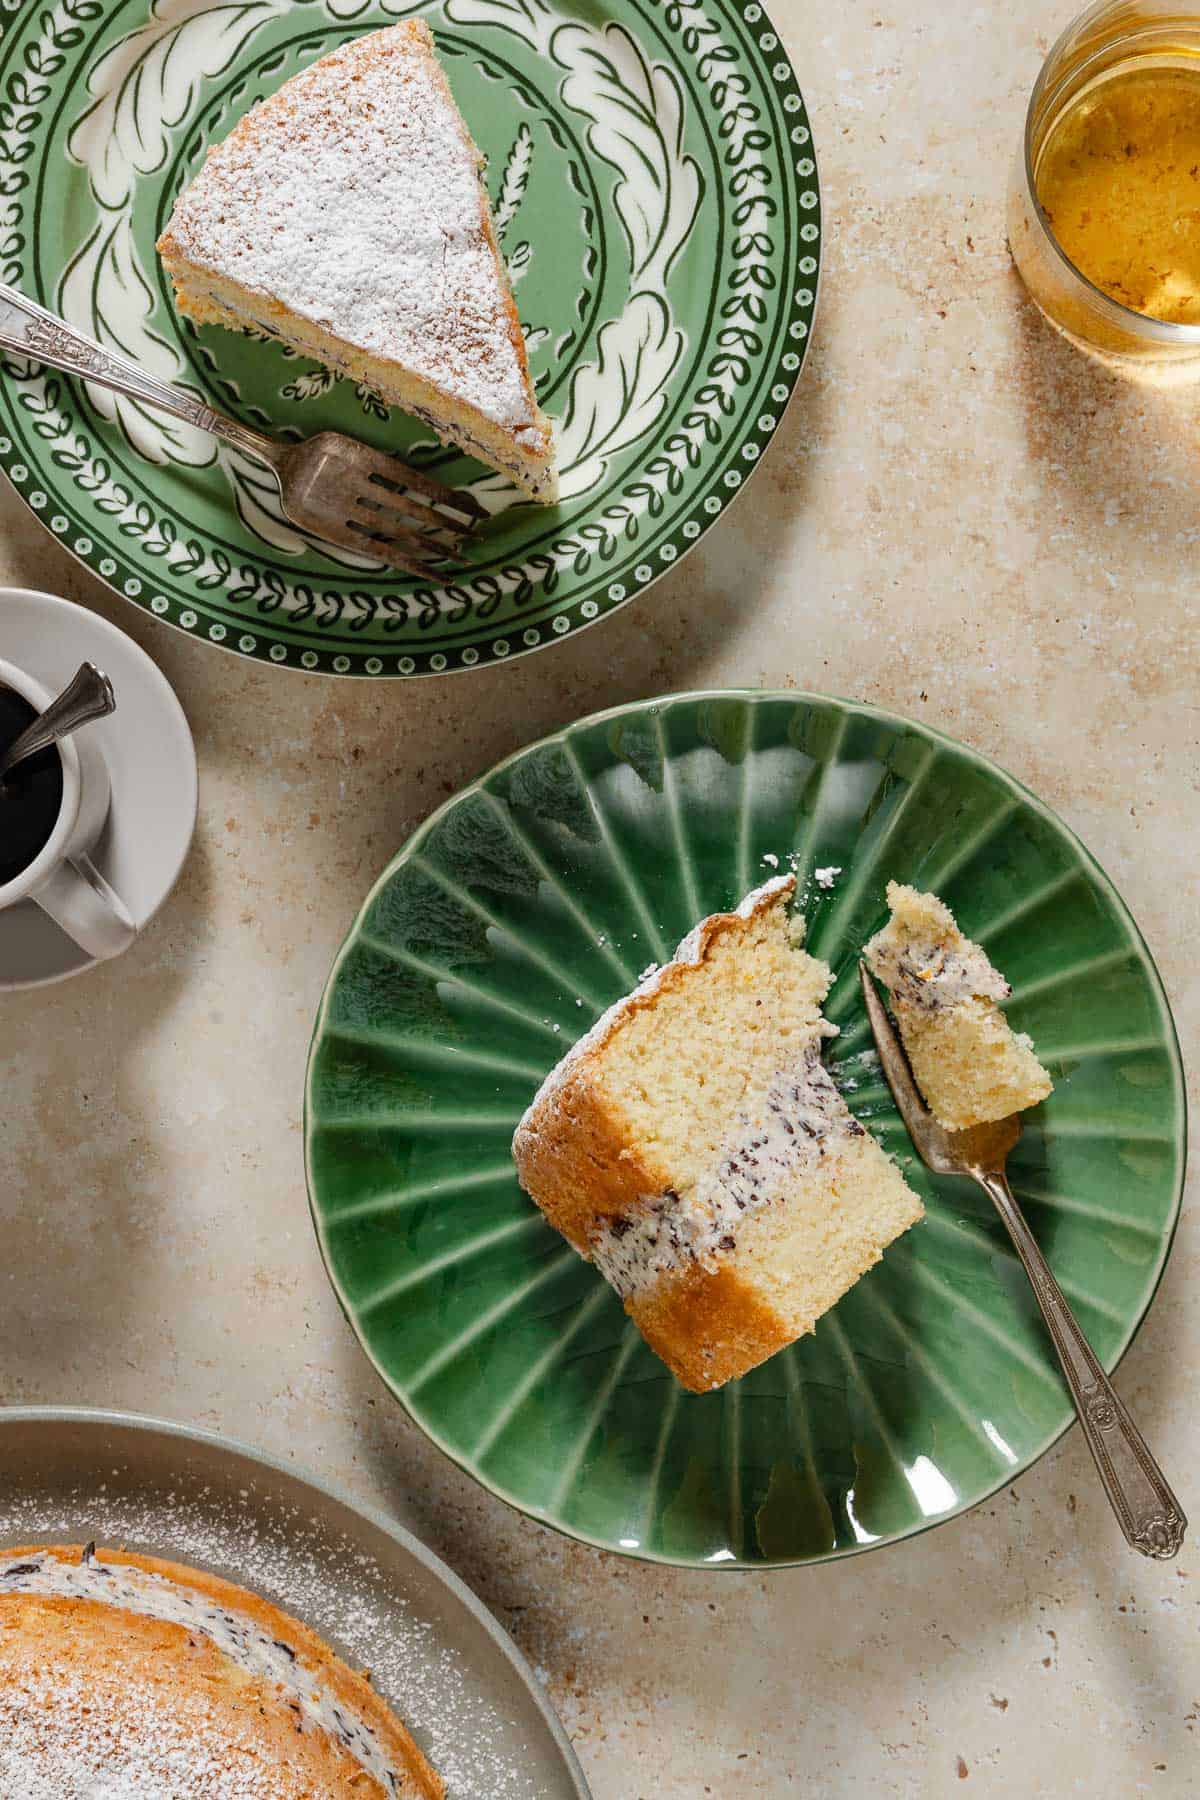 An overhead photo of two slices of easy cassata cake on two plates with forks. Surrounding this is a cup of coffee, a glass of juice, and the rest of the cake on a serving platter.